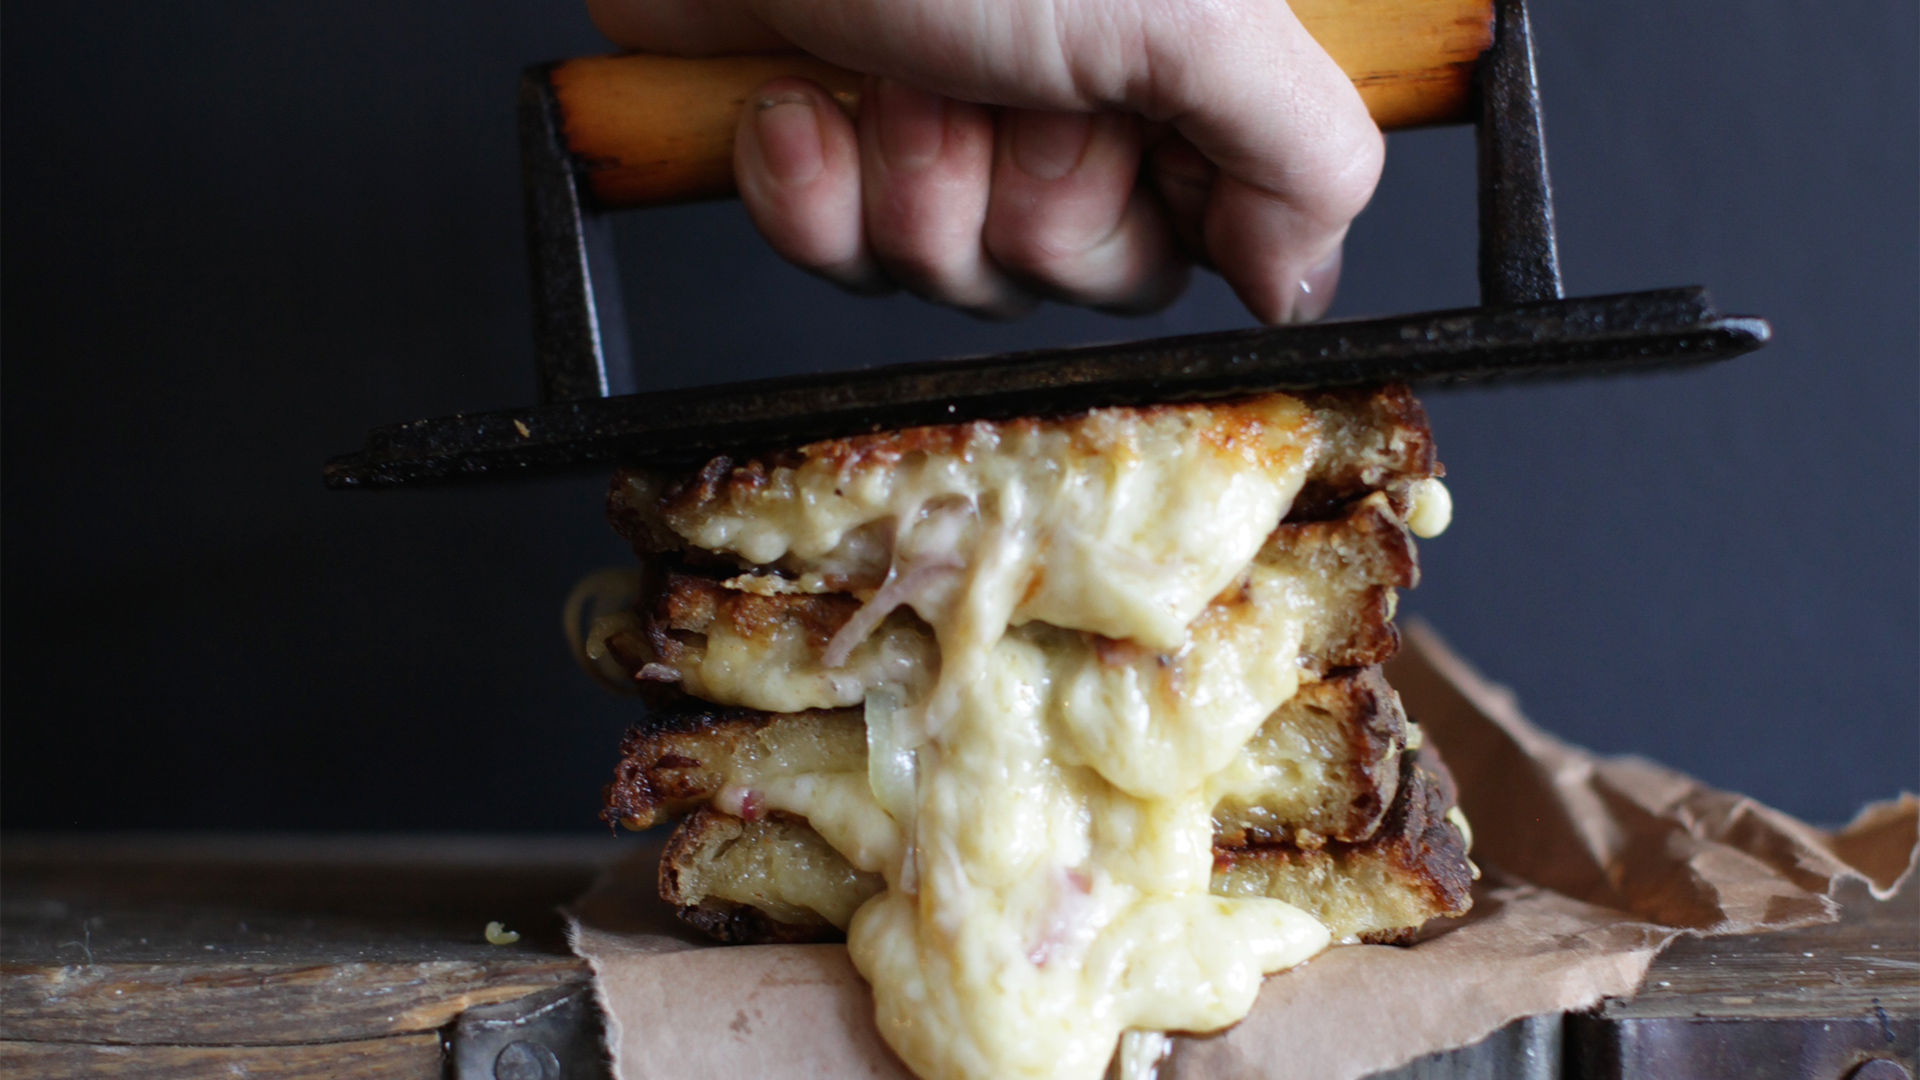 A toasted sandwich with cheese oozing out is squashed by The Cheese Truck's chef holding an iron press. Image courtesy of The Cheese Truck.